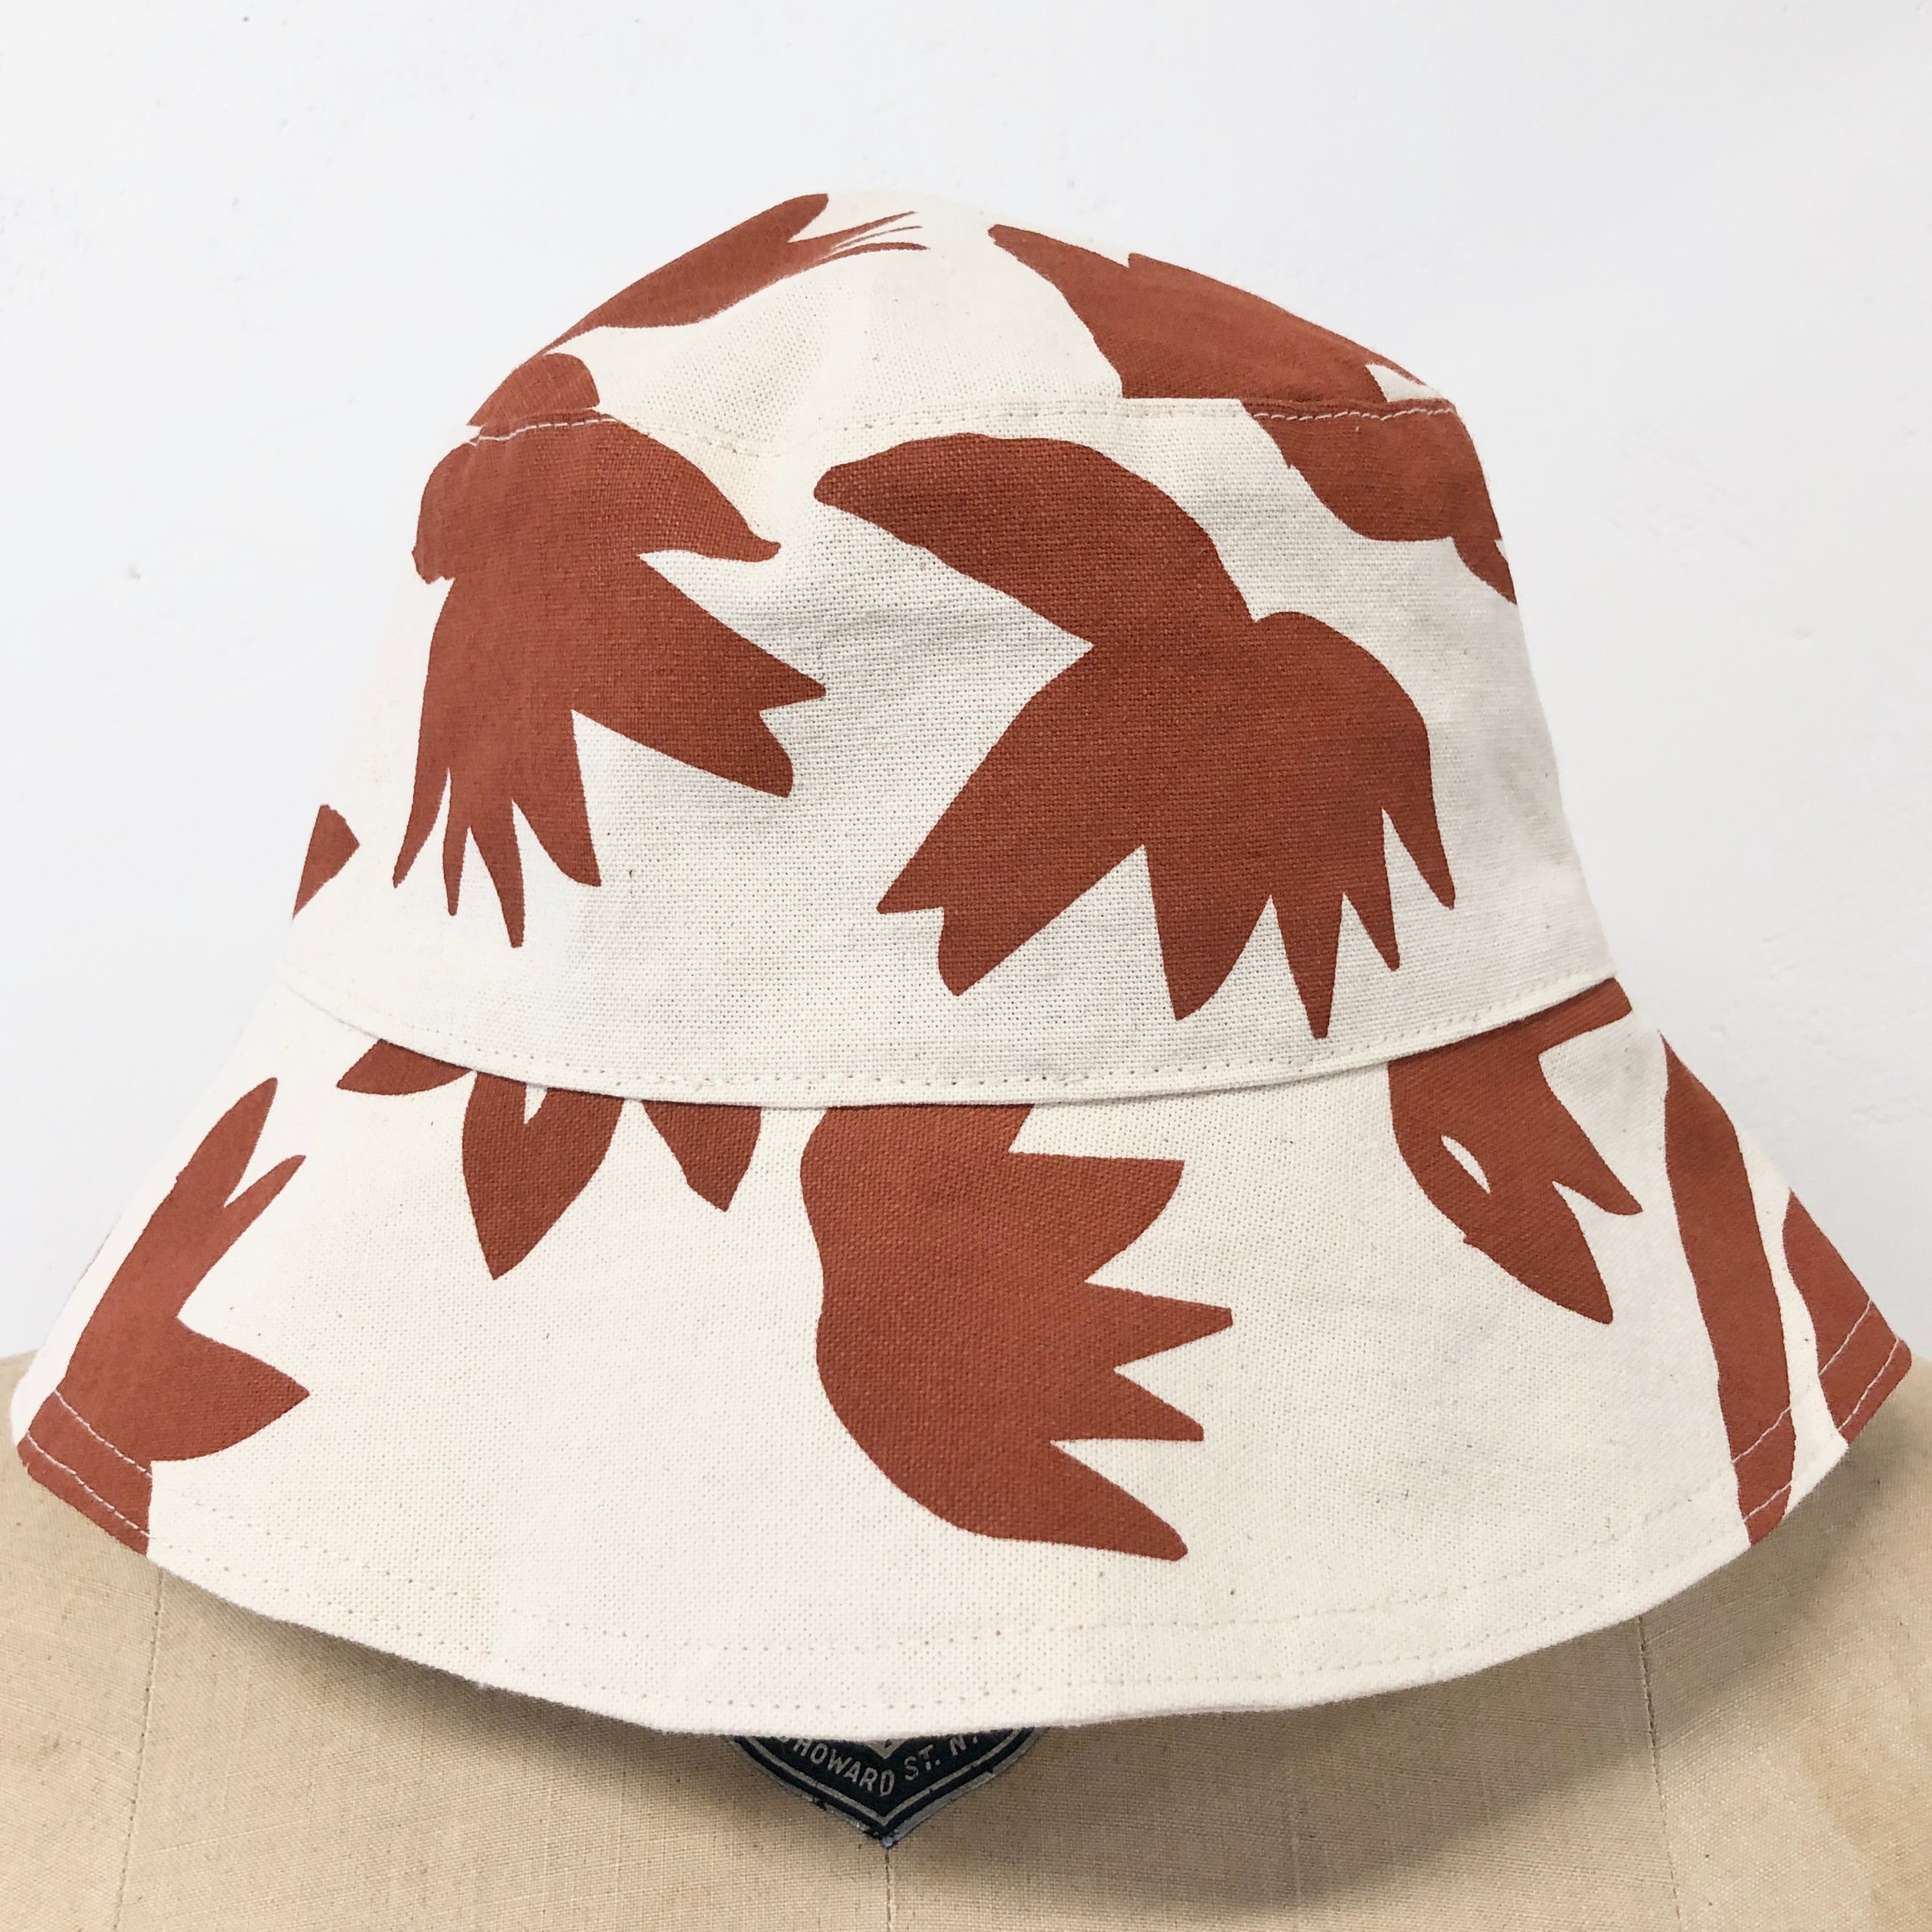 Day Of Spring - Bucket Hat for Women